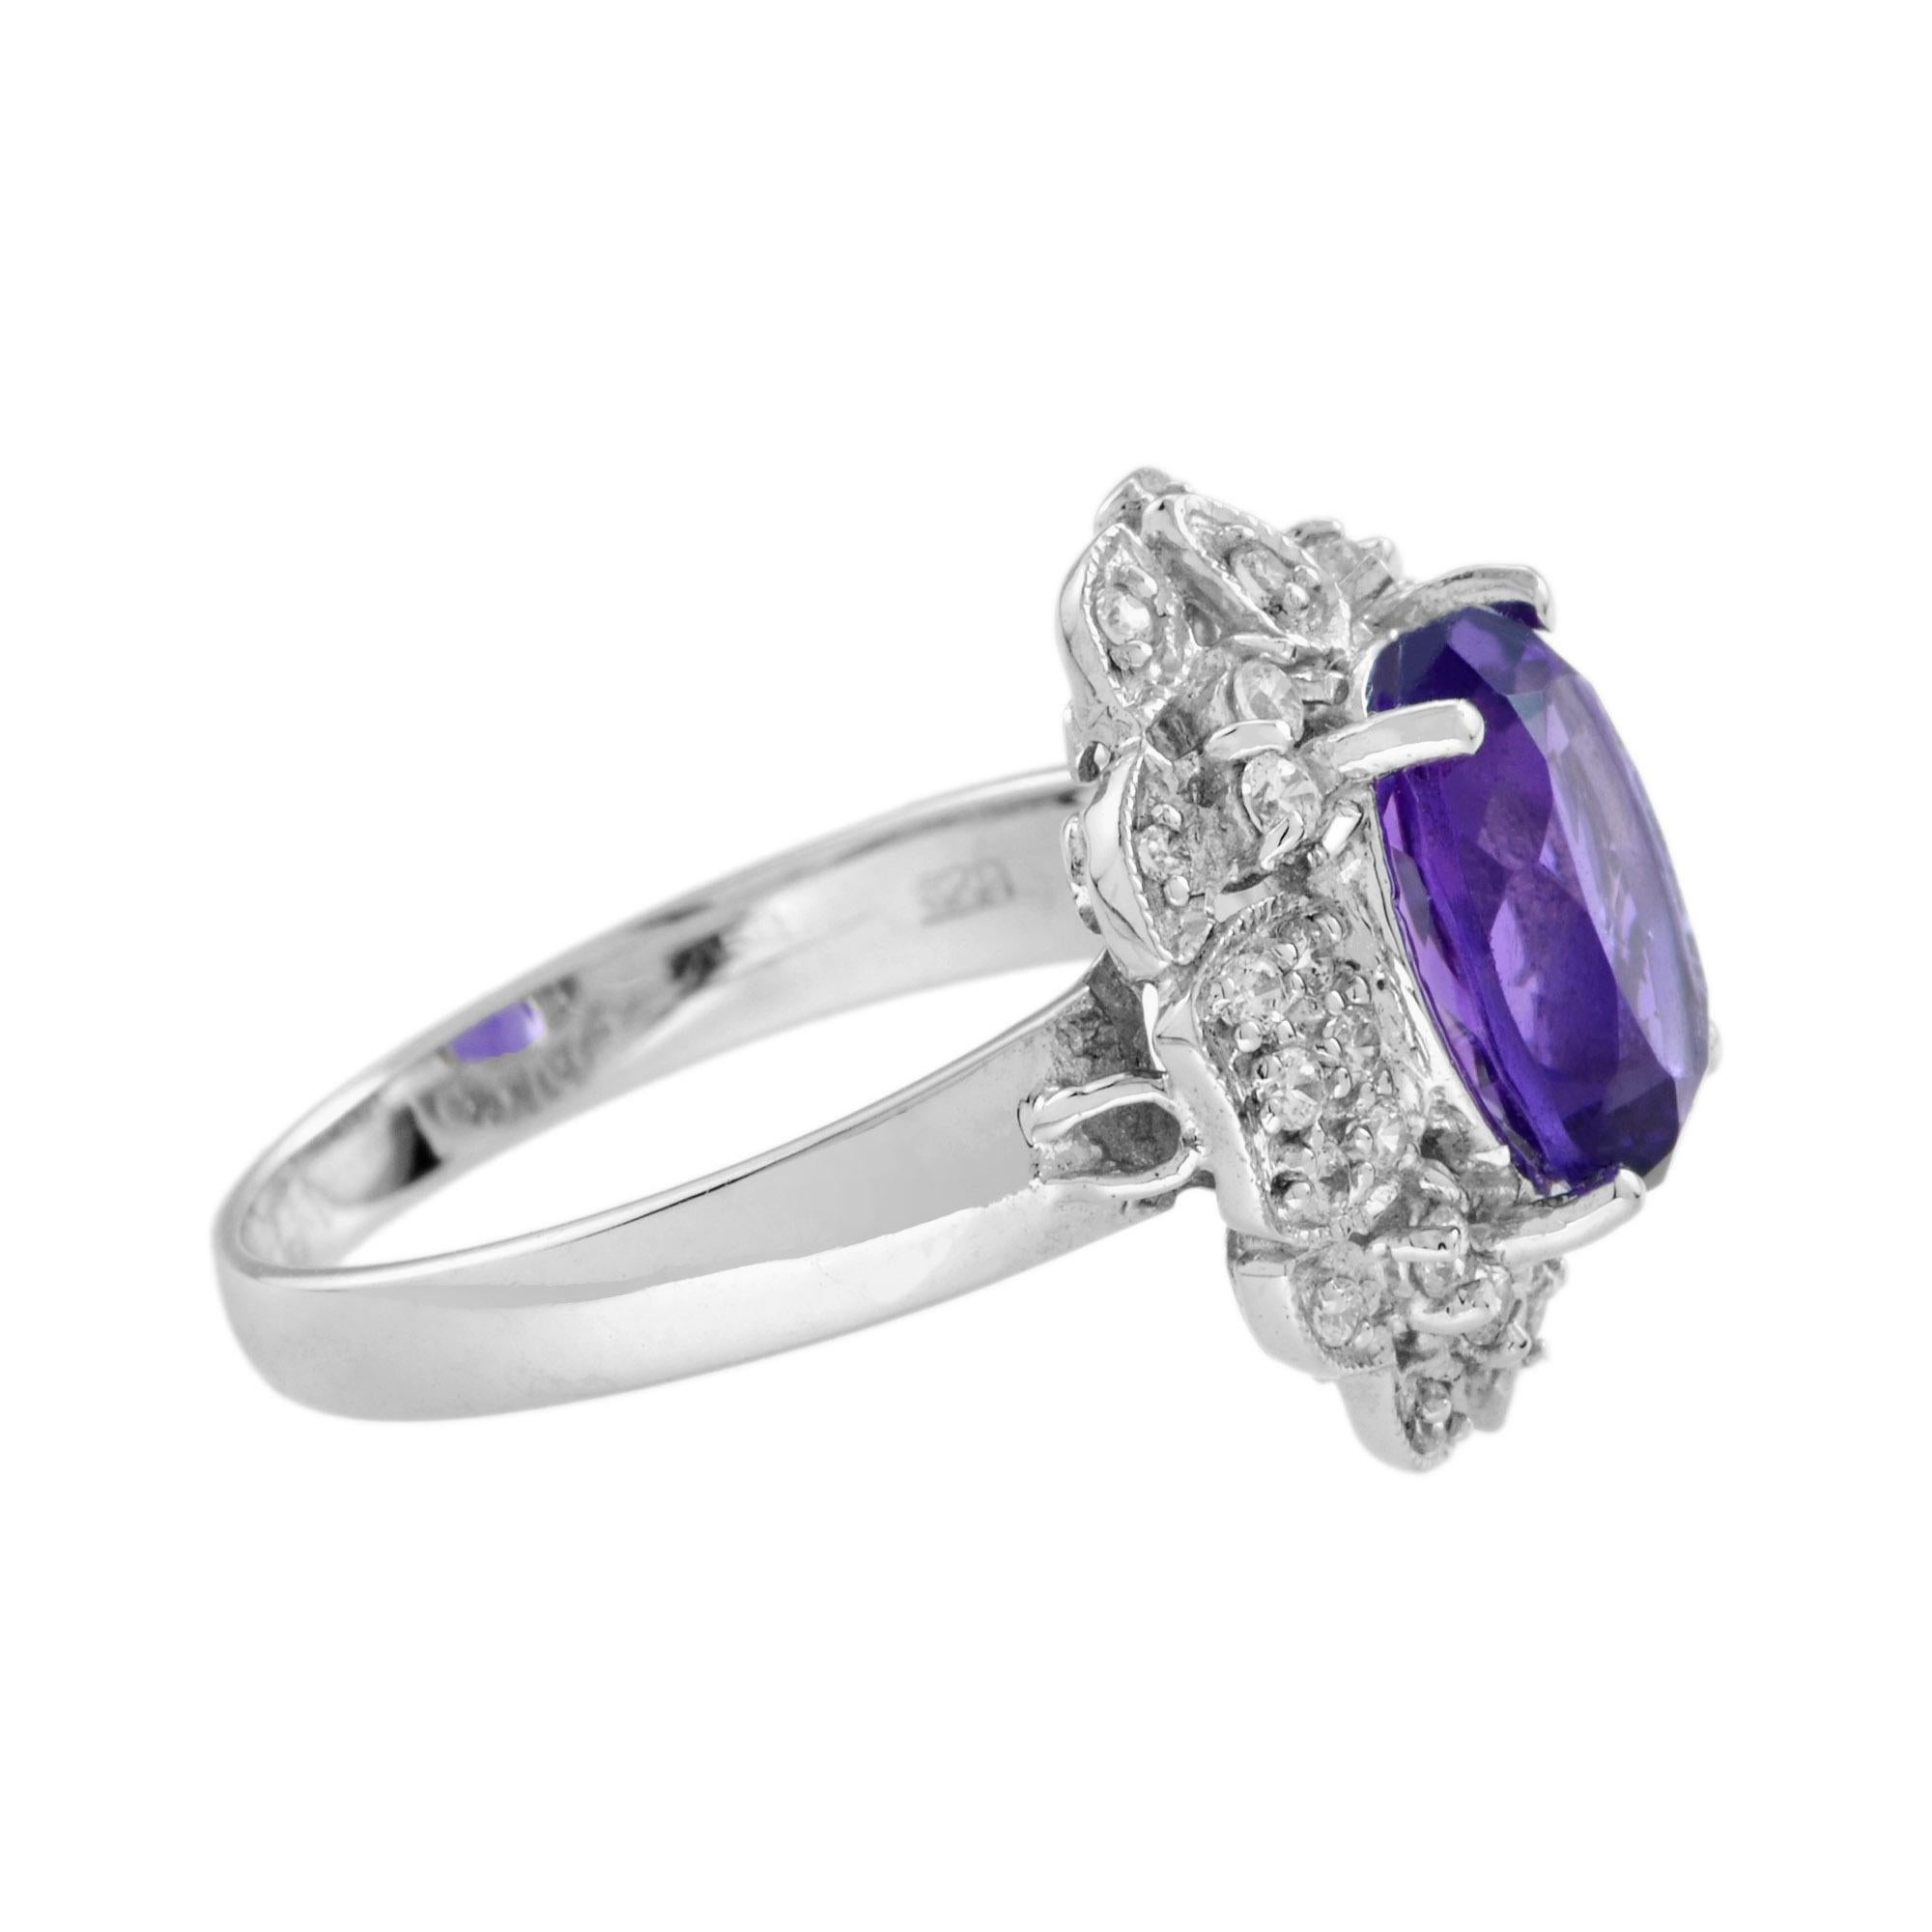 For Sale:  2.6 Ct. Amethyst and Diamond Halo Ring in 18K White Gold 3